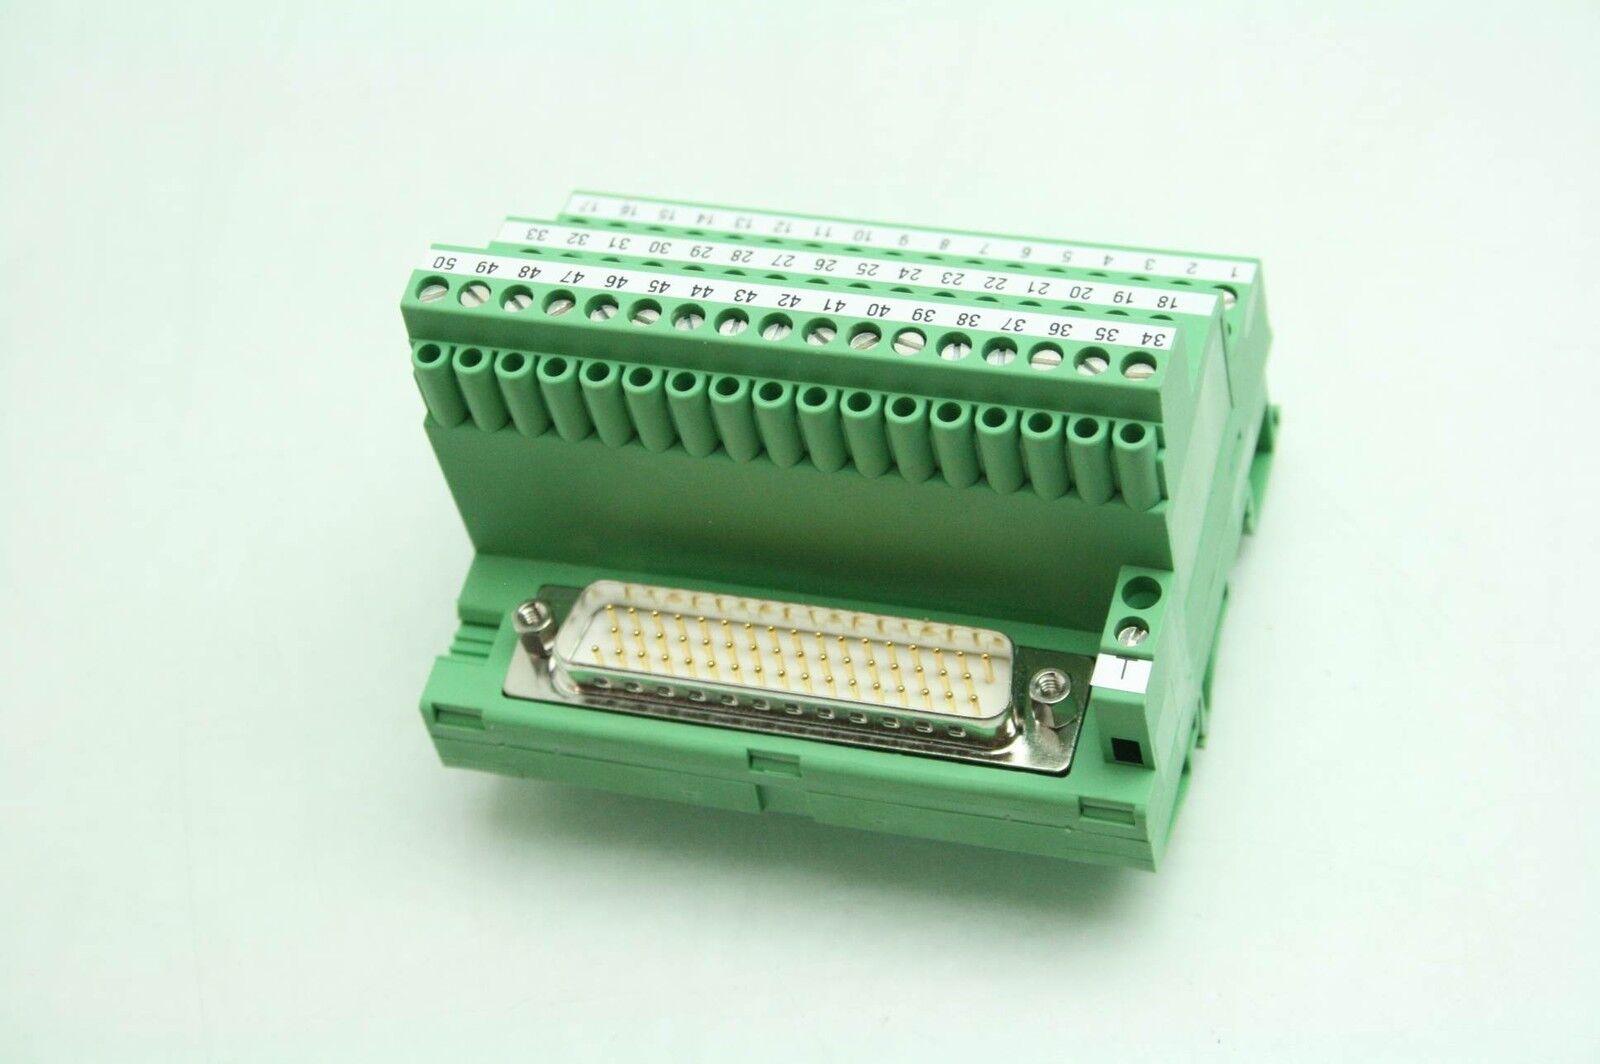 Phoenix Contact FLK-D50 SUB/S VARIOFACE Interface Terminal Module DB50  Connector - Used - Motion Constrained Surplus